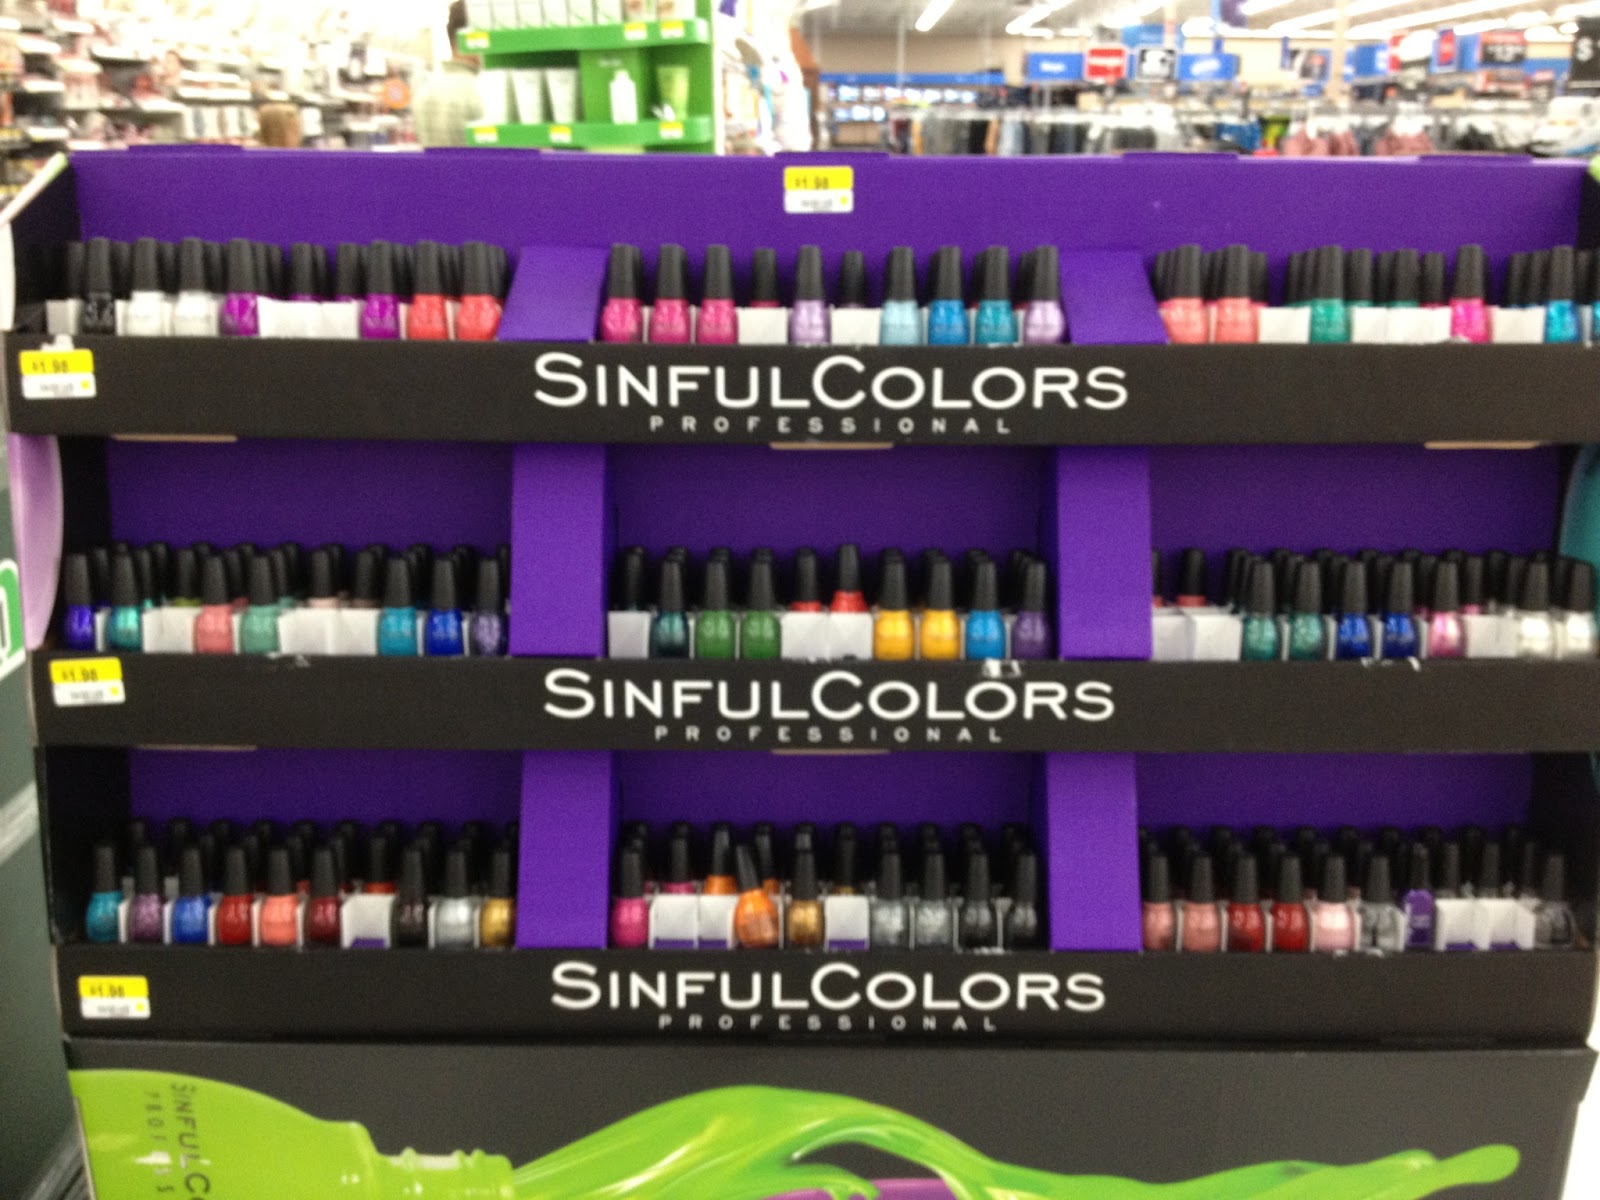 Sinful Colors Professional Nail Products - wide 8